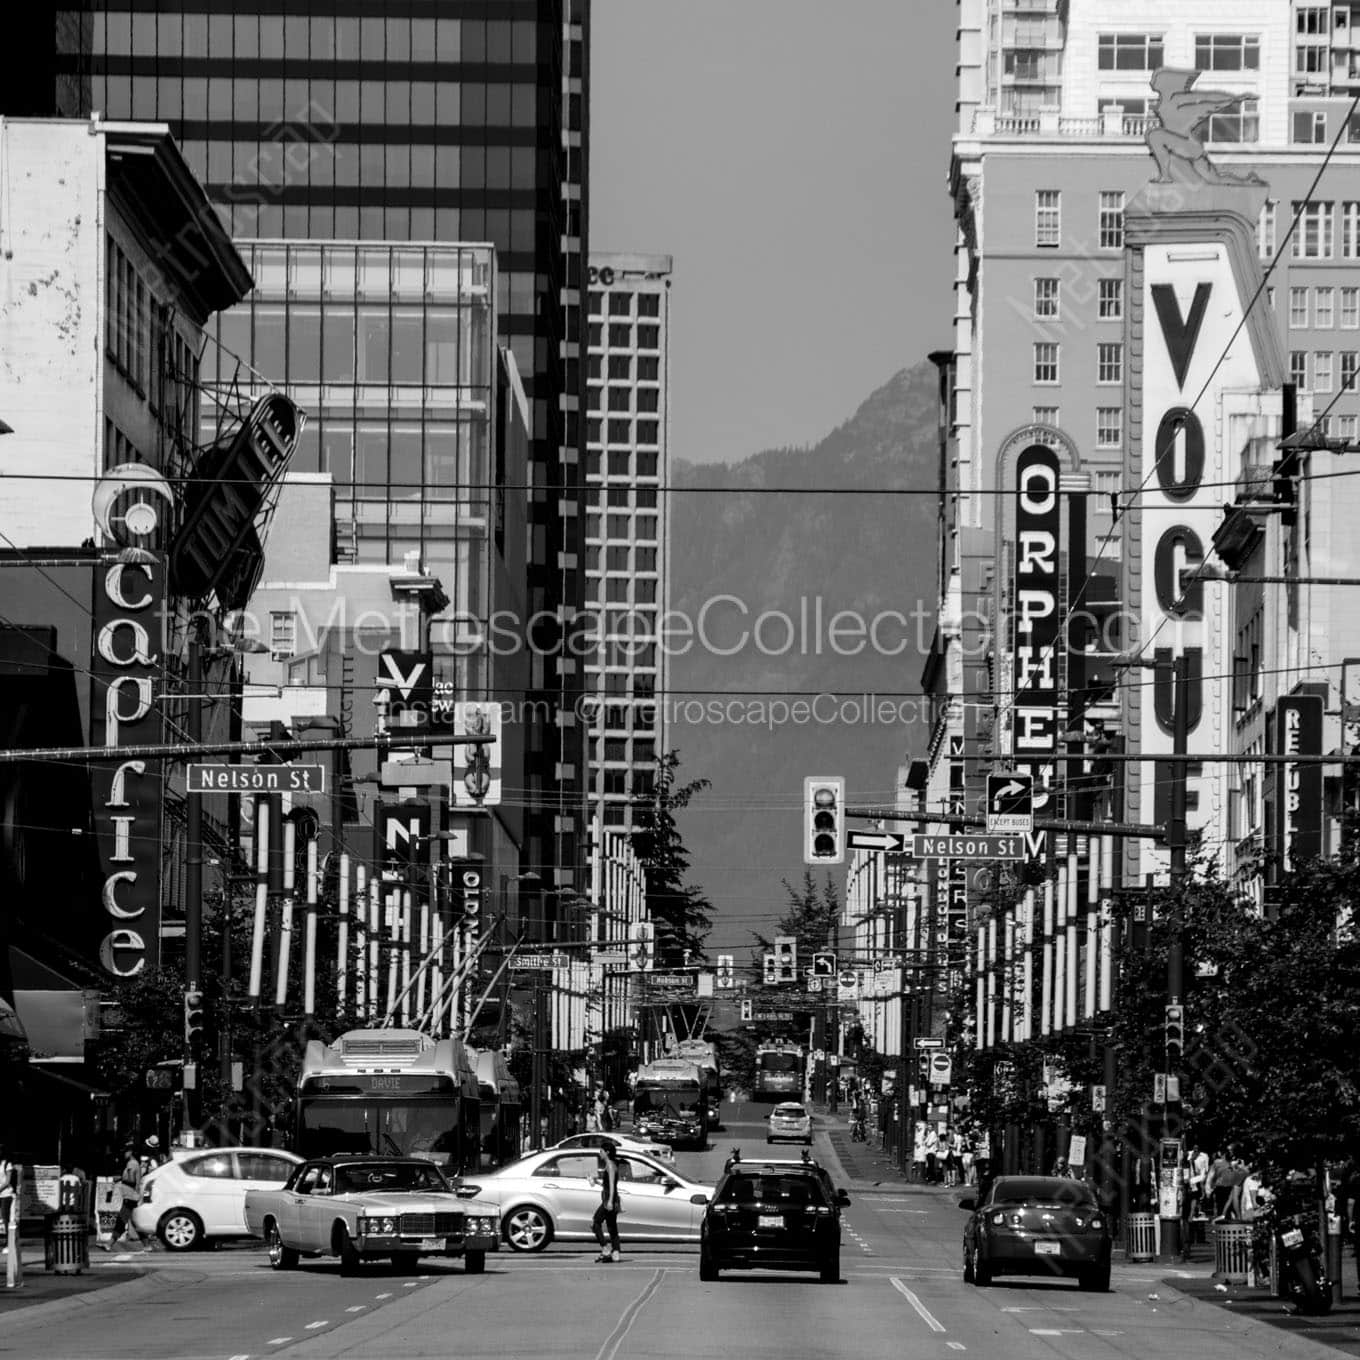 nelson and granville streets vancouver Black & White Office Art